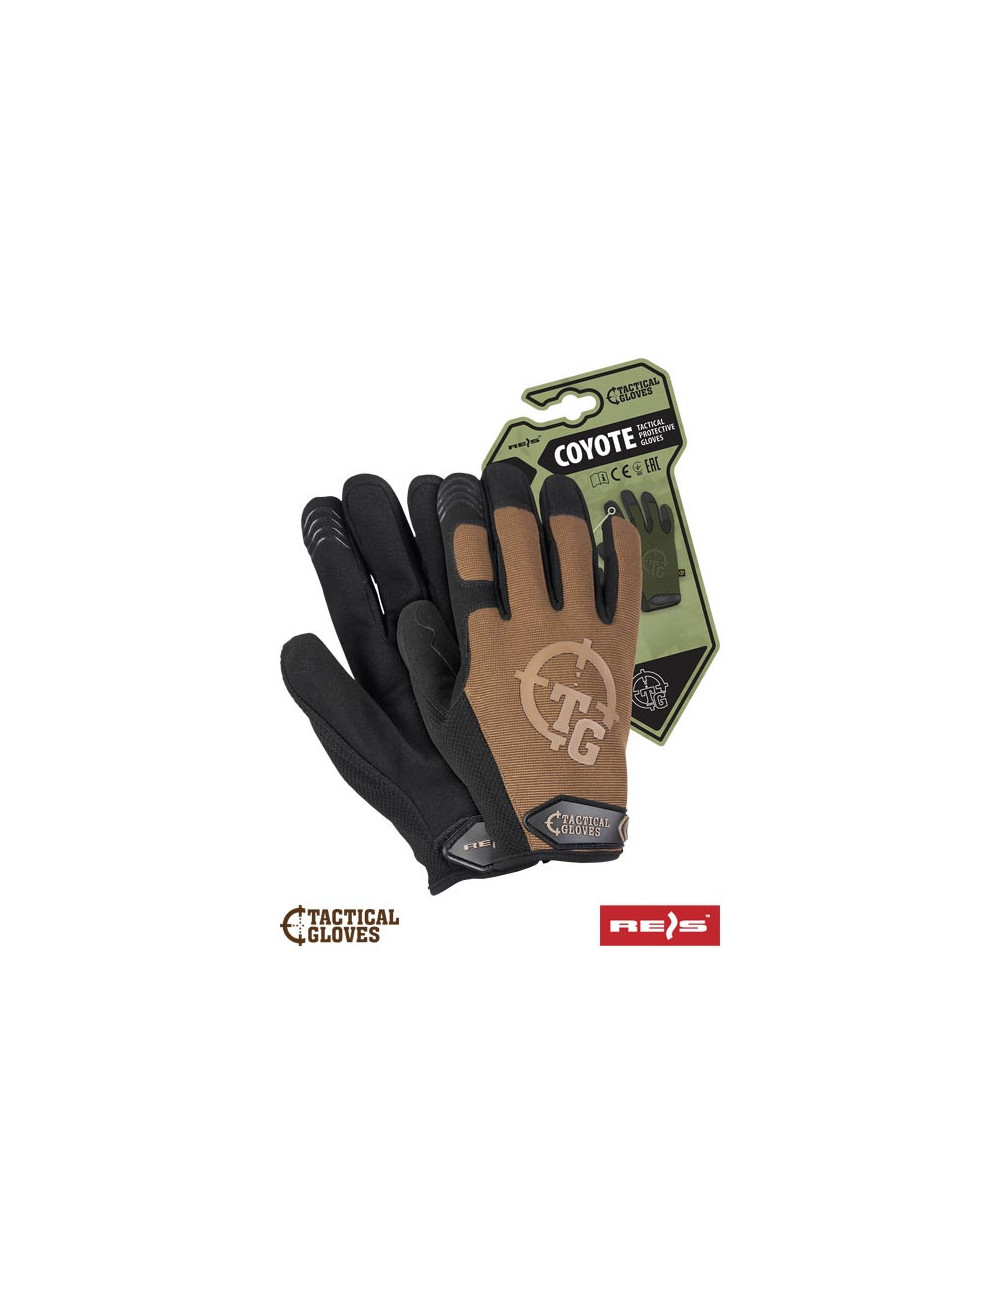 Tactical protective gloves rtc-coyote coy coyote Reis